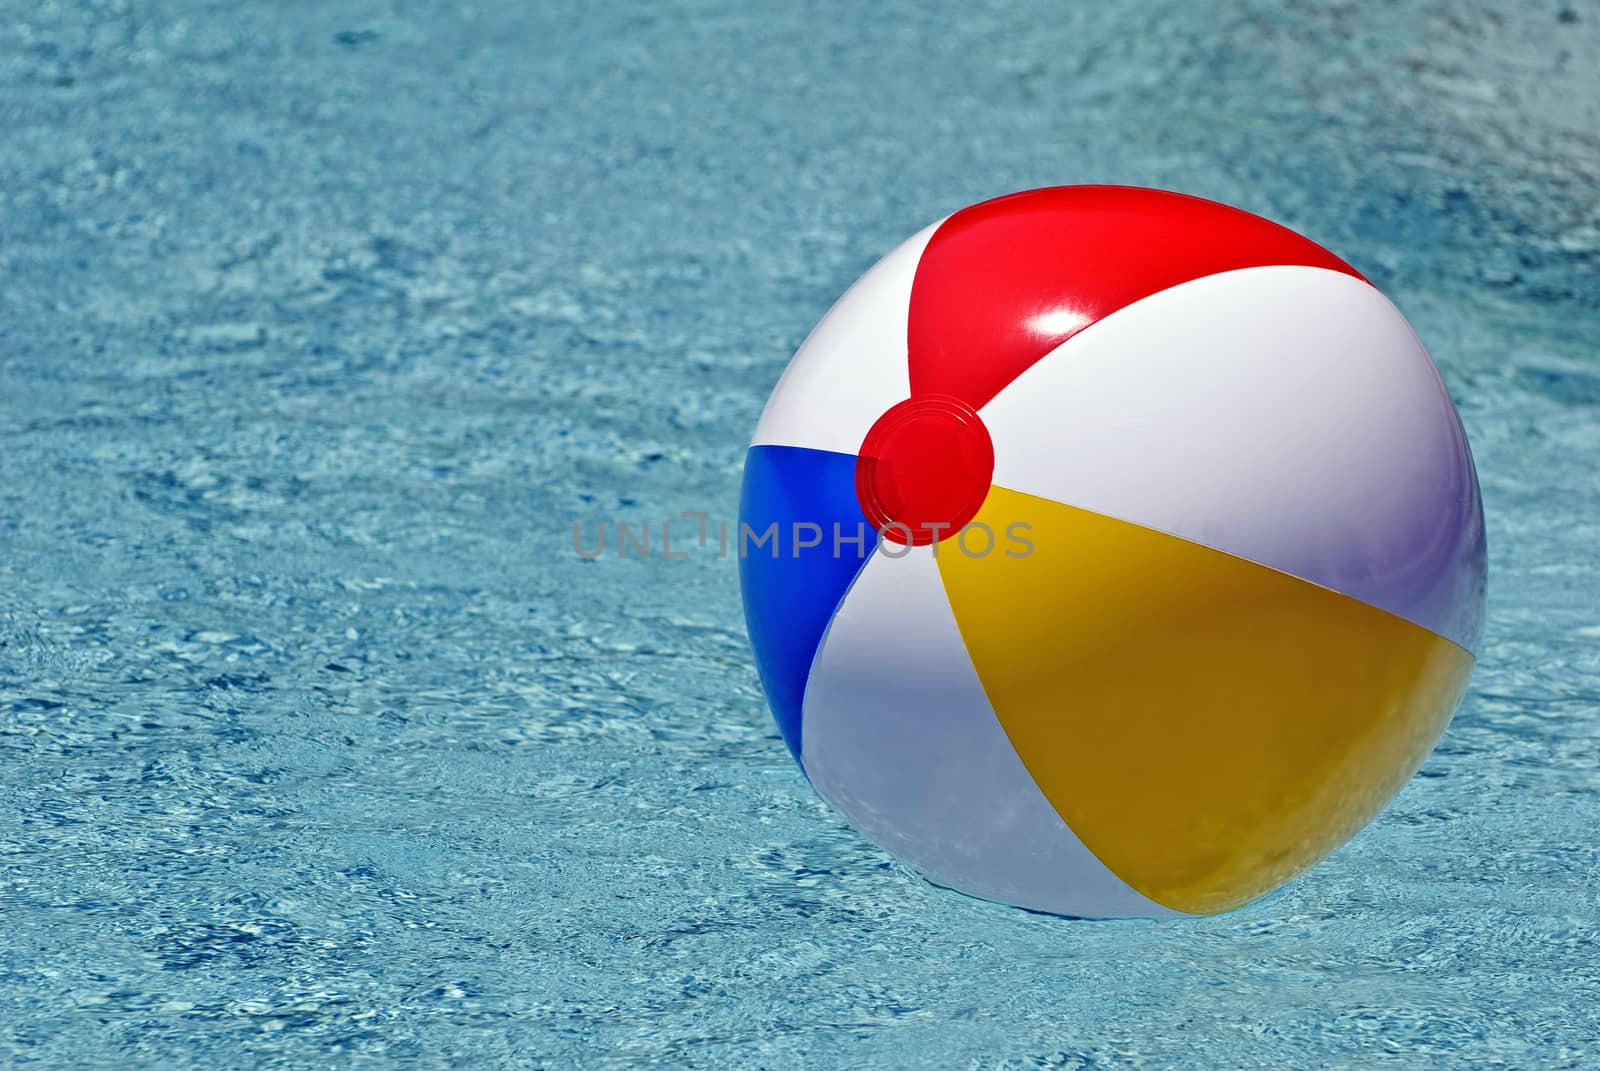 Colorful Beach Ball In Swimming Pool by stockbuster1